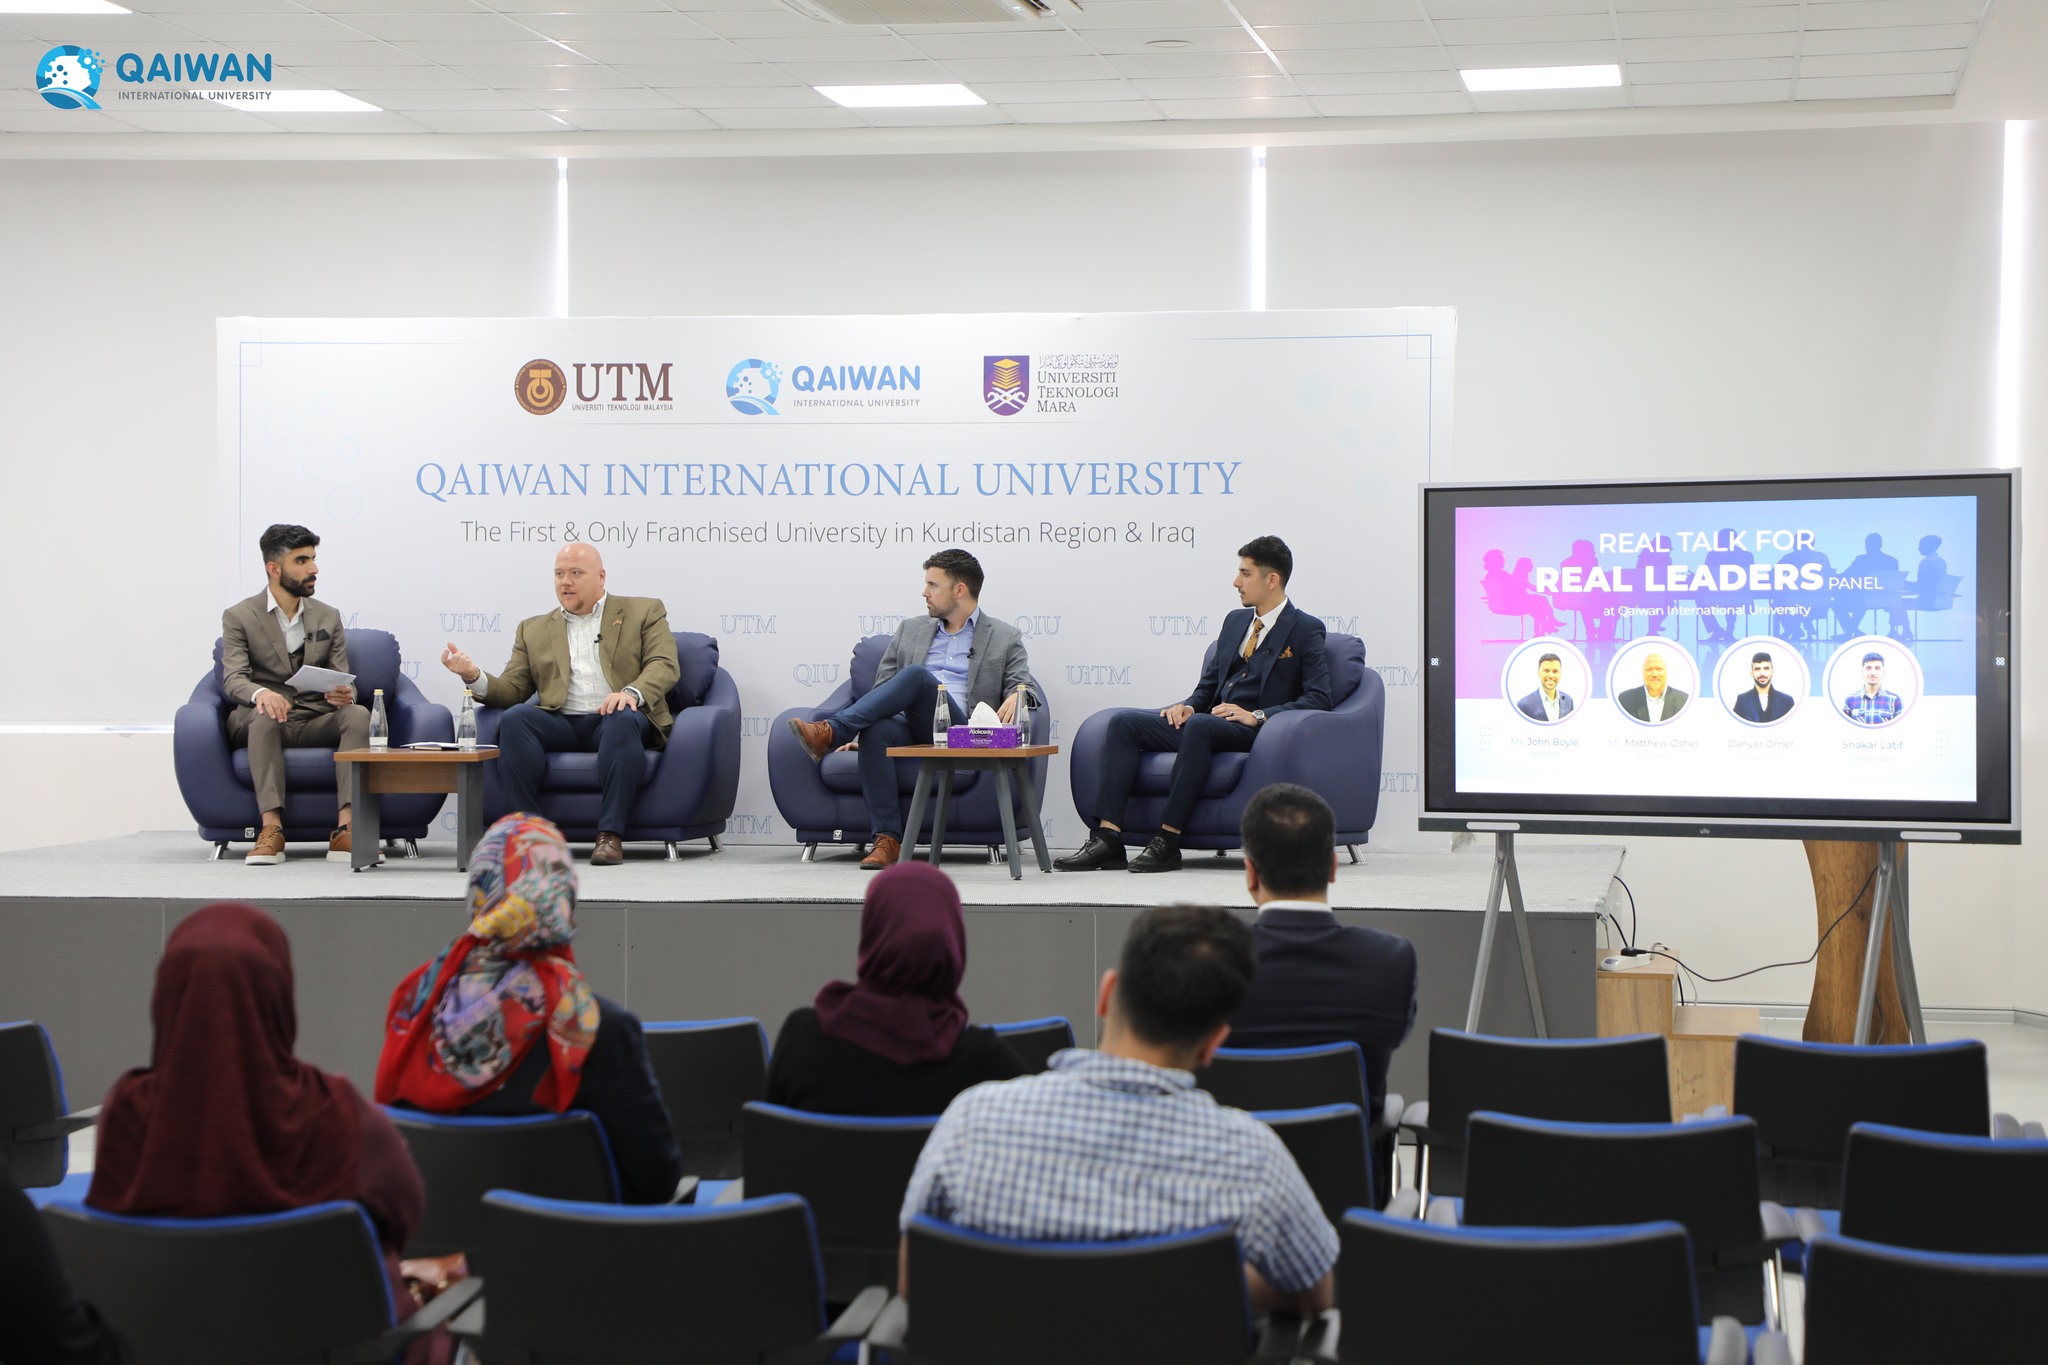 Panel on "Real Talk for Real Leaders" was presented at QIU